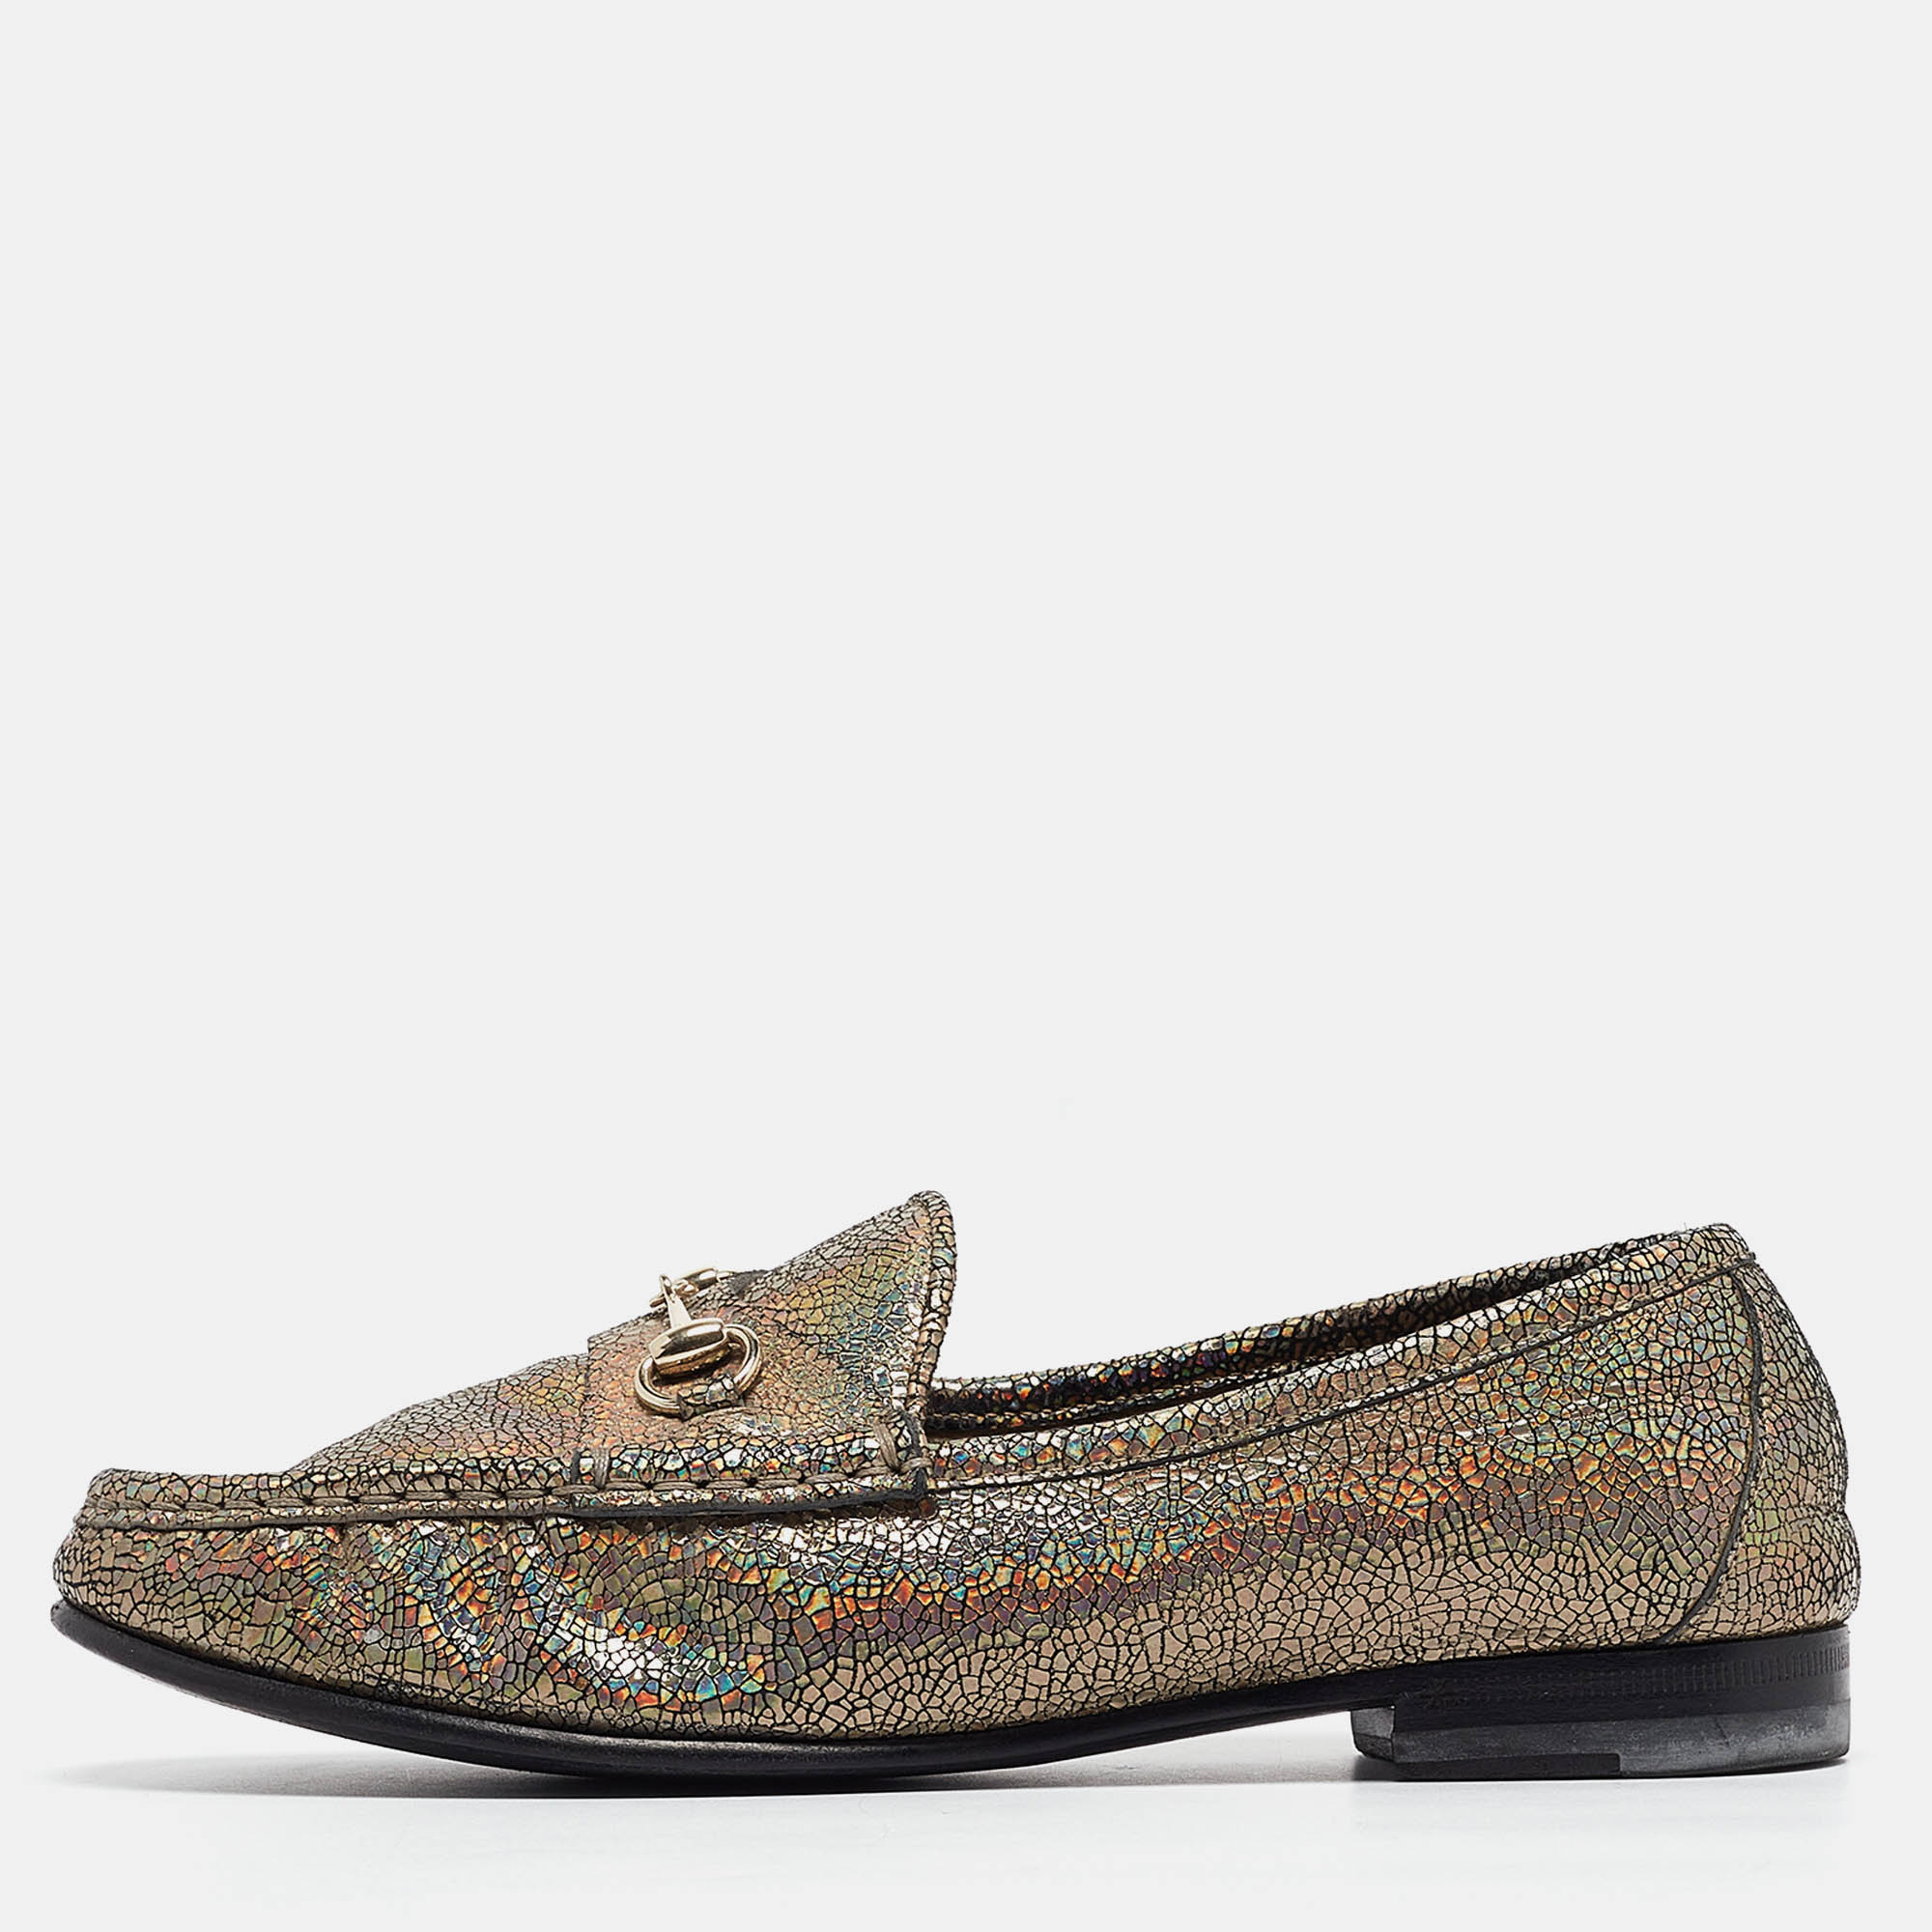 Pre-owned Gucci Multicolor Foil Textured Leather Horsebit Slip On Loafers Size 36